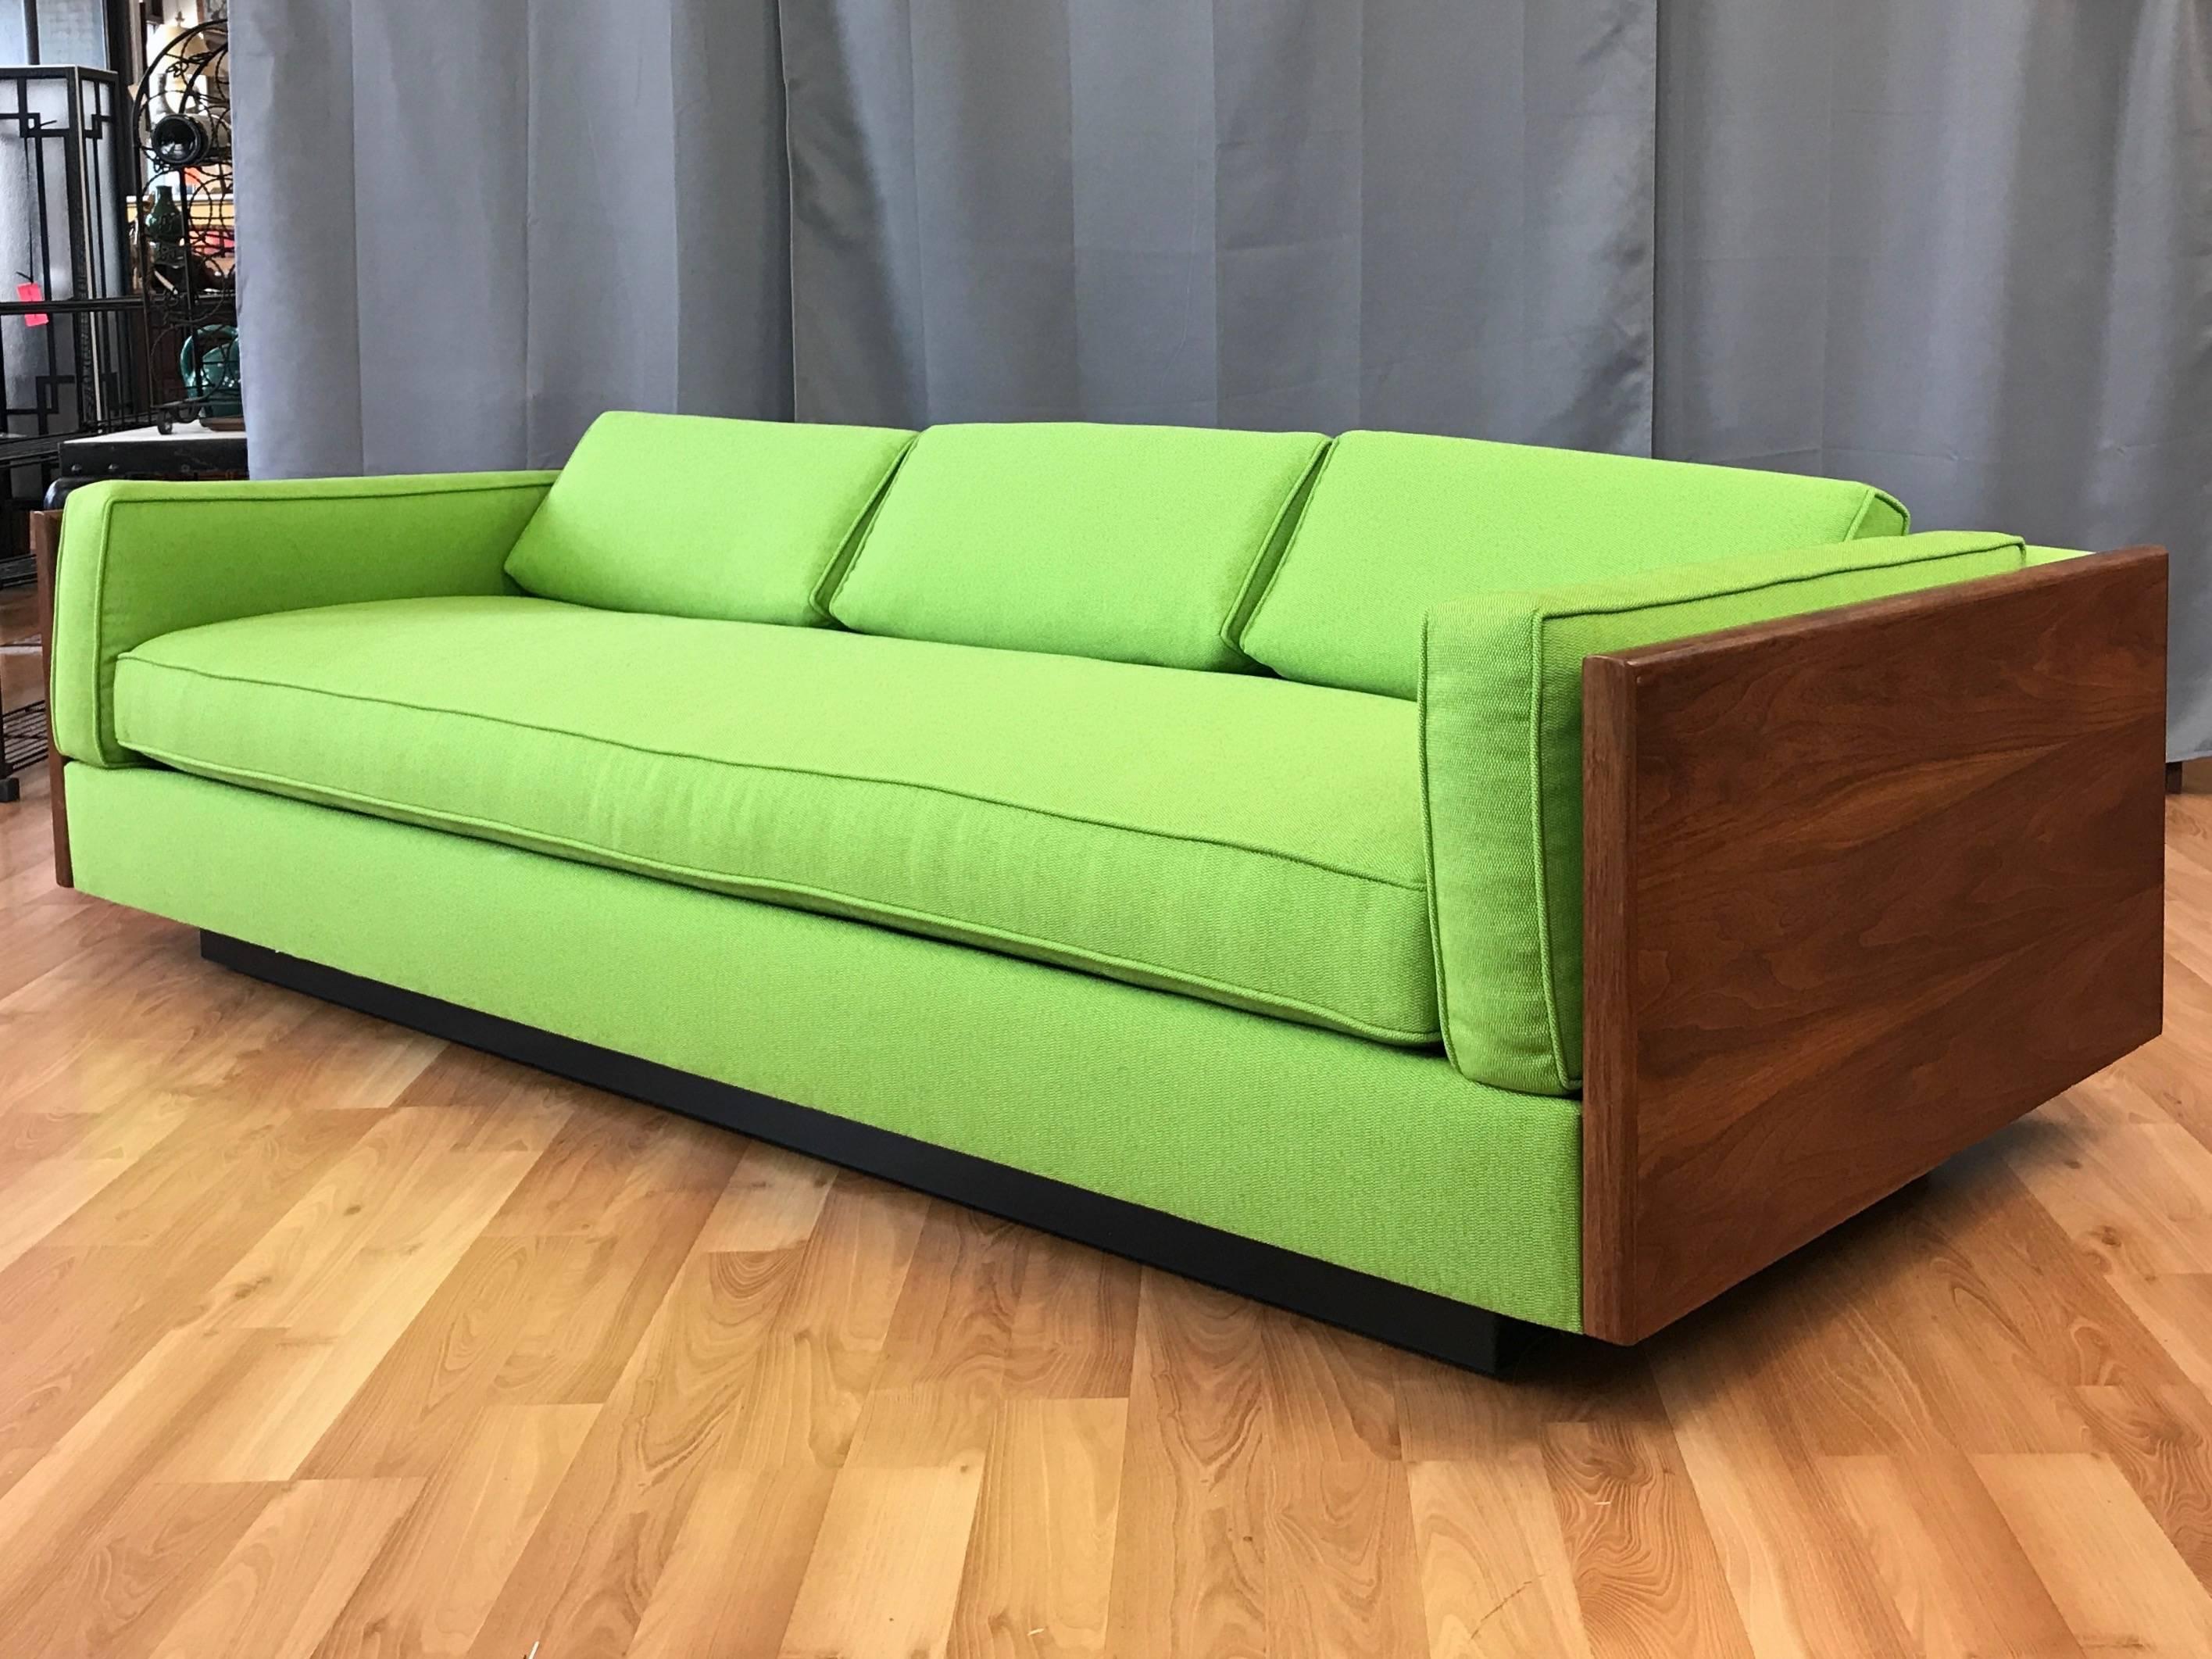 An extra-long and eye-catching 1970s case or box sofa with walnut sides and new upholstery, done in the style of Milo Baughman.

Substantial sides finished in bookmatched walnut with an exceptionally handsome and lively figure. Freshly dressed